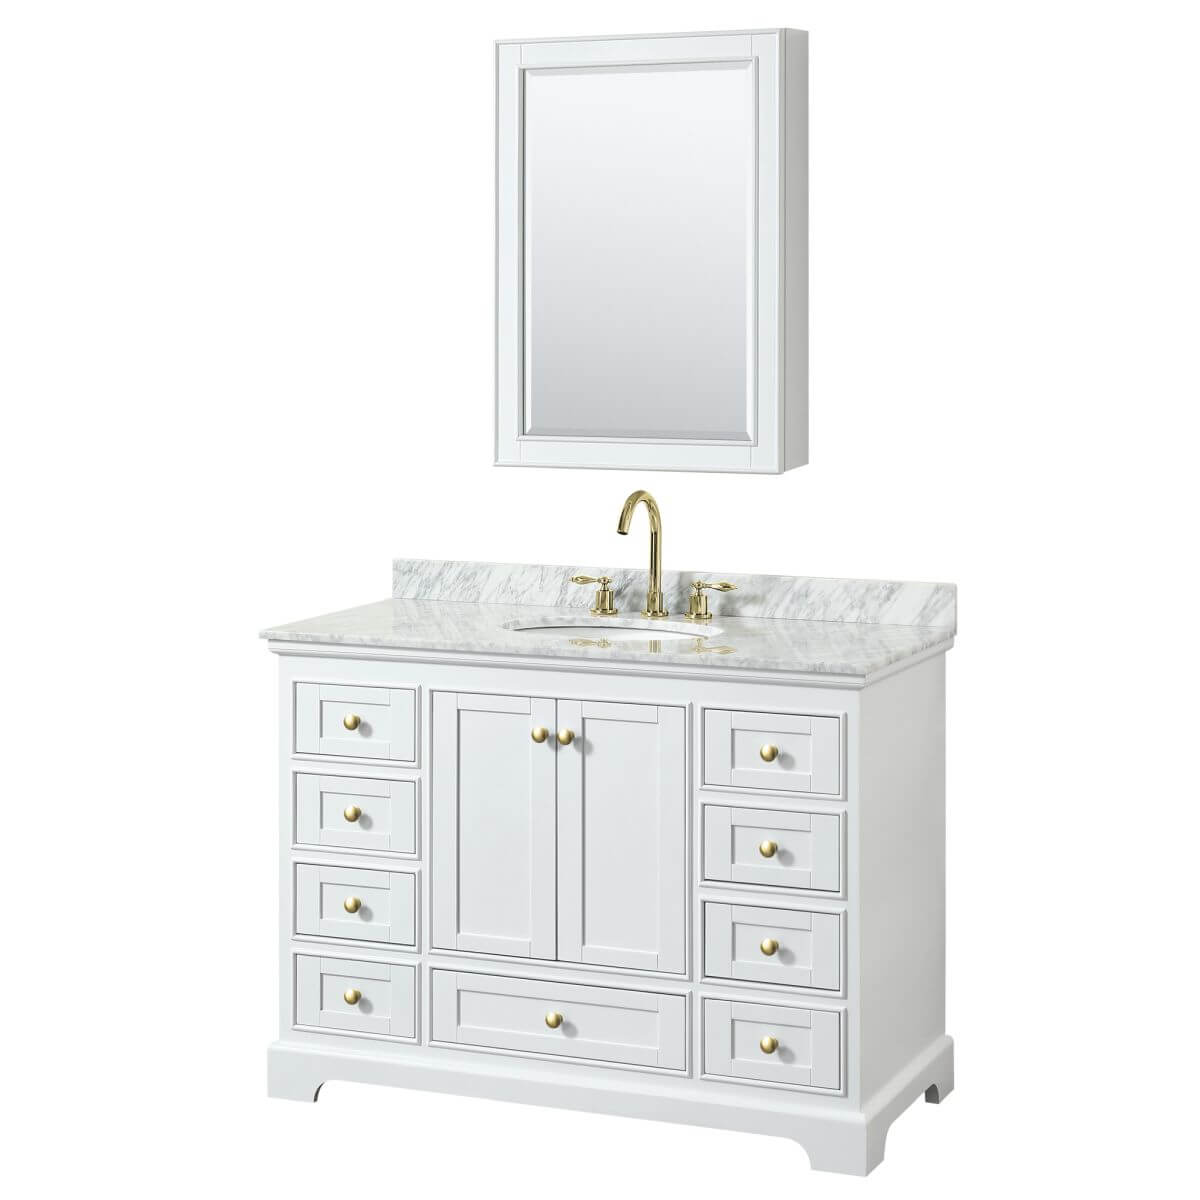 Wyndham Collection Deborah 48 inch Single Bathroom Vanity in White with White Carrara Marble Countertop, Undermount Oval Sink, Brushed Gold Trim and Medicine Cabinet - WCS202048SWGCMUNOMED